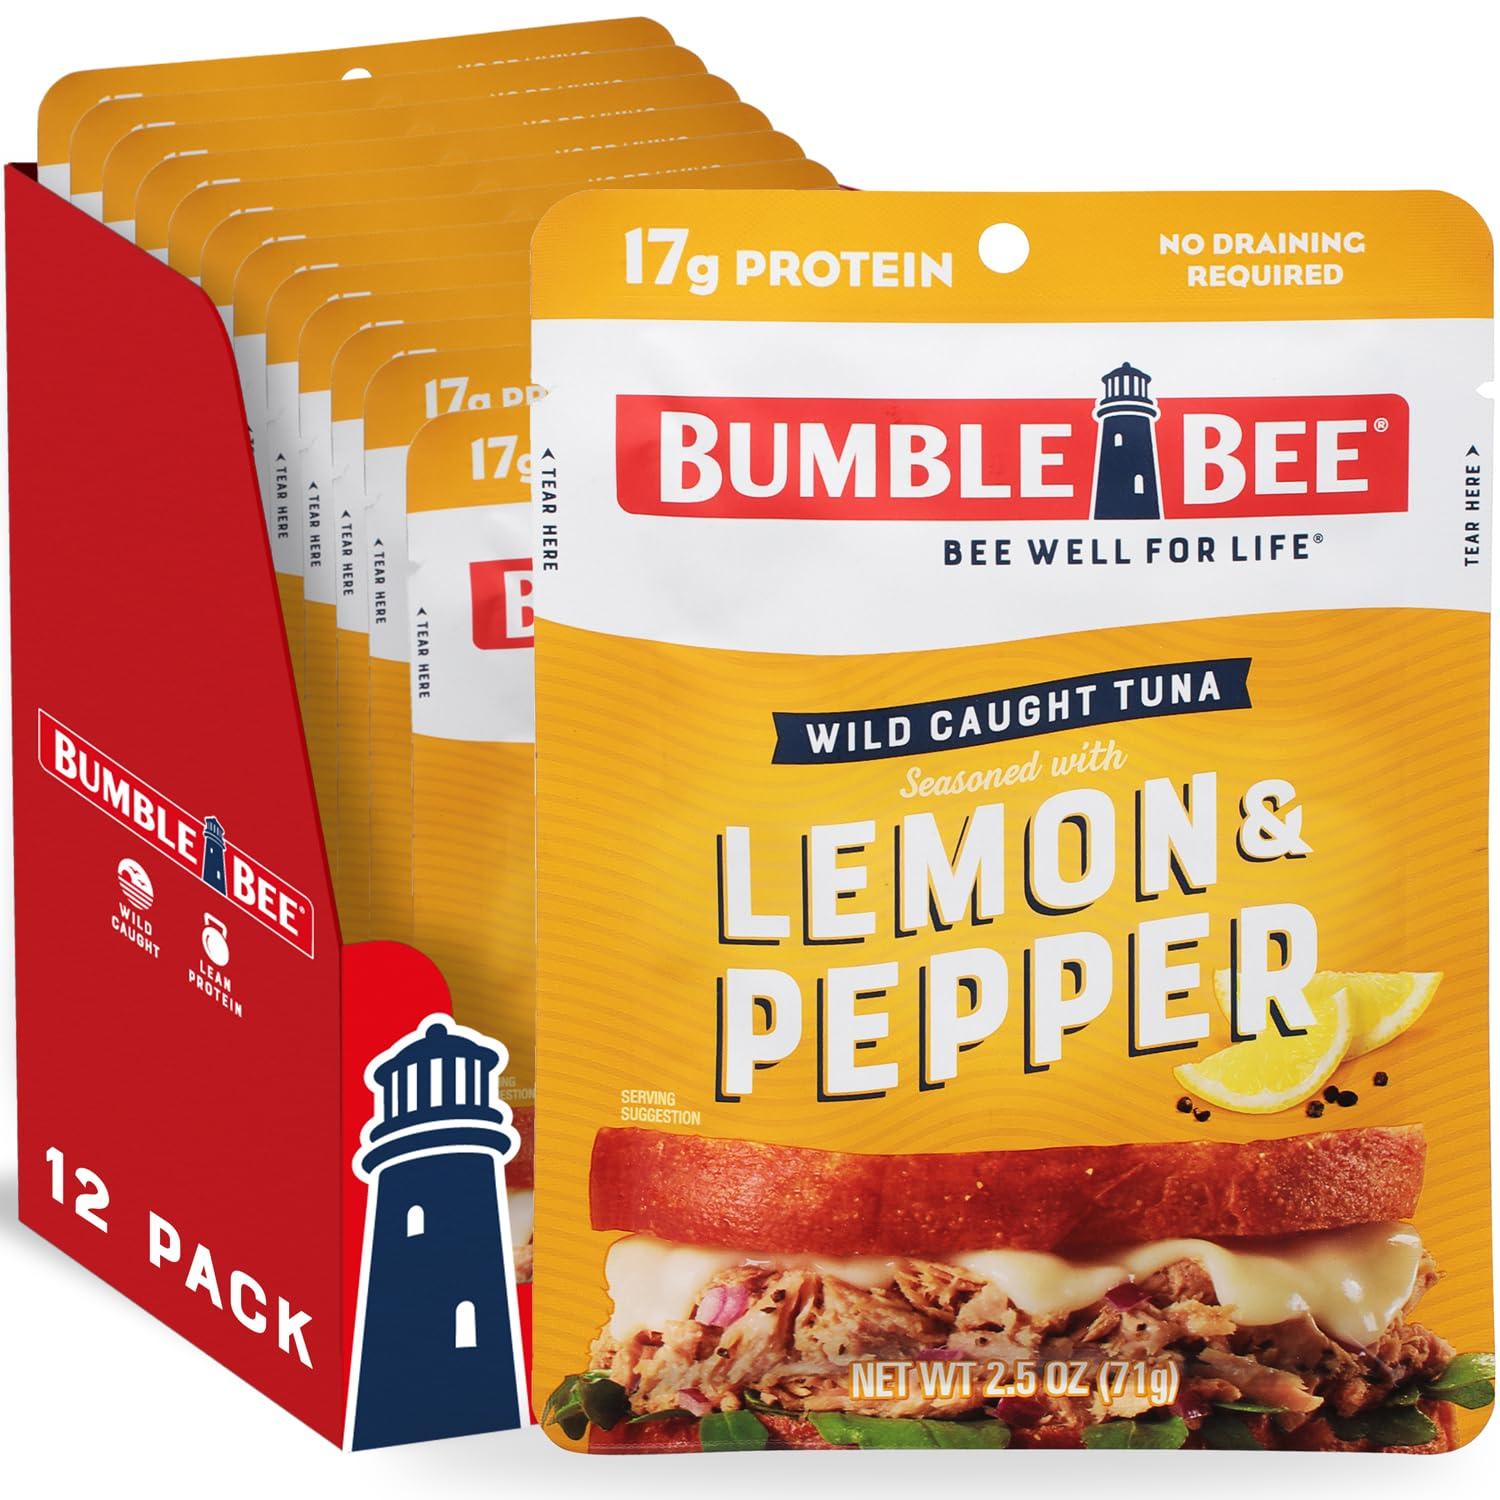 Bumble Bee Wild-Caught Tuna Pouch Lemon and Pepper 12 Pack for $8.65